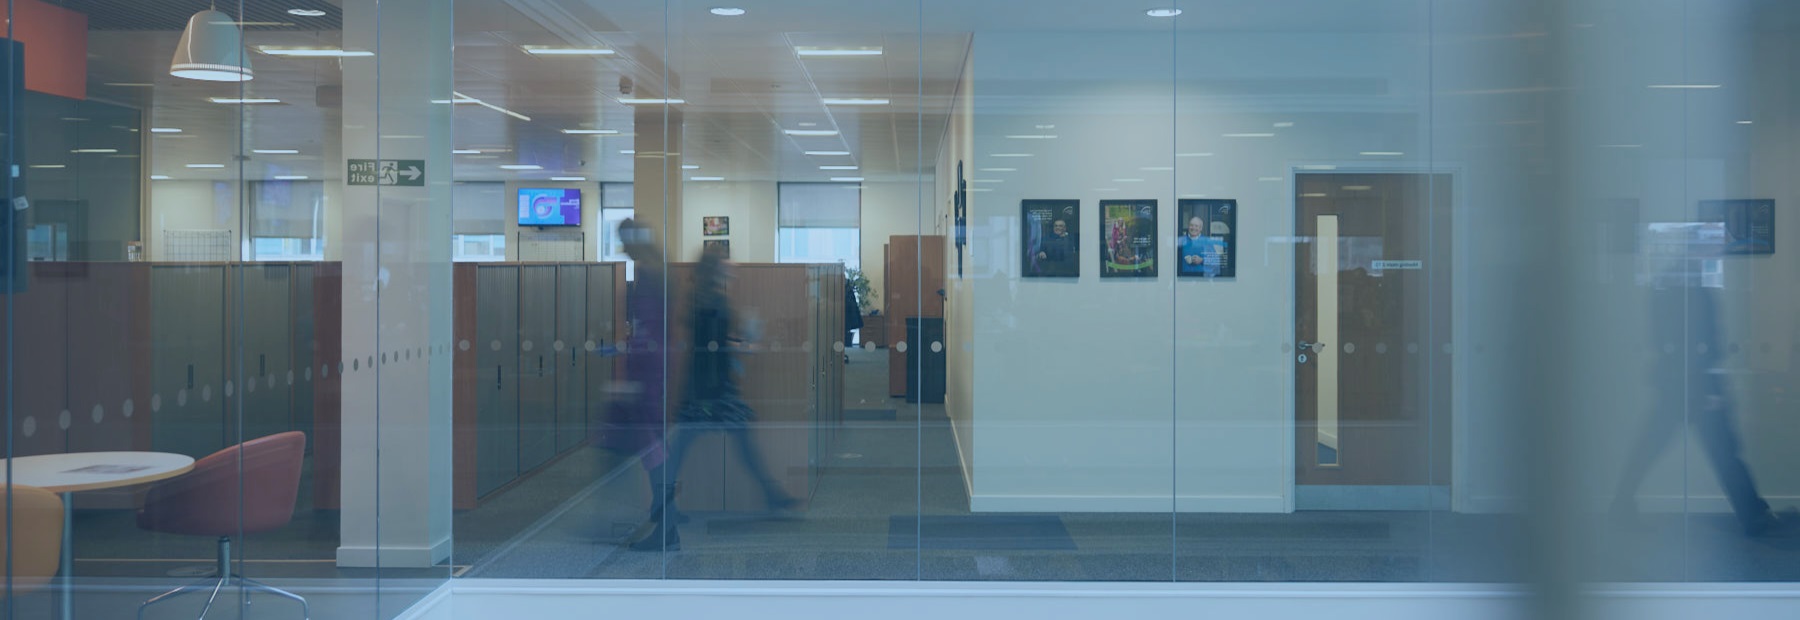 Blurred image of office hallway and glass walls